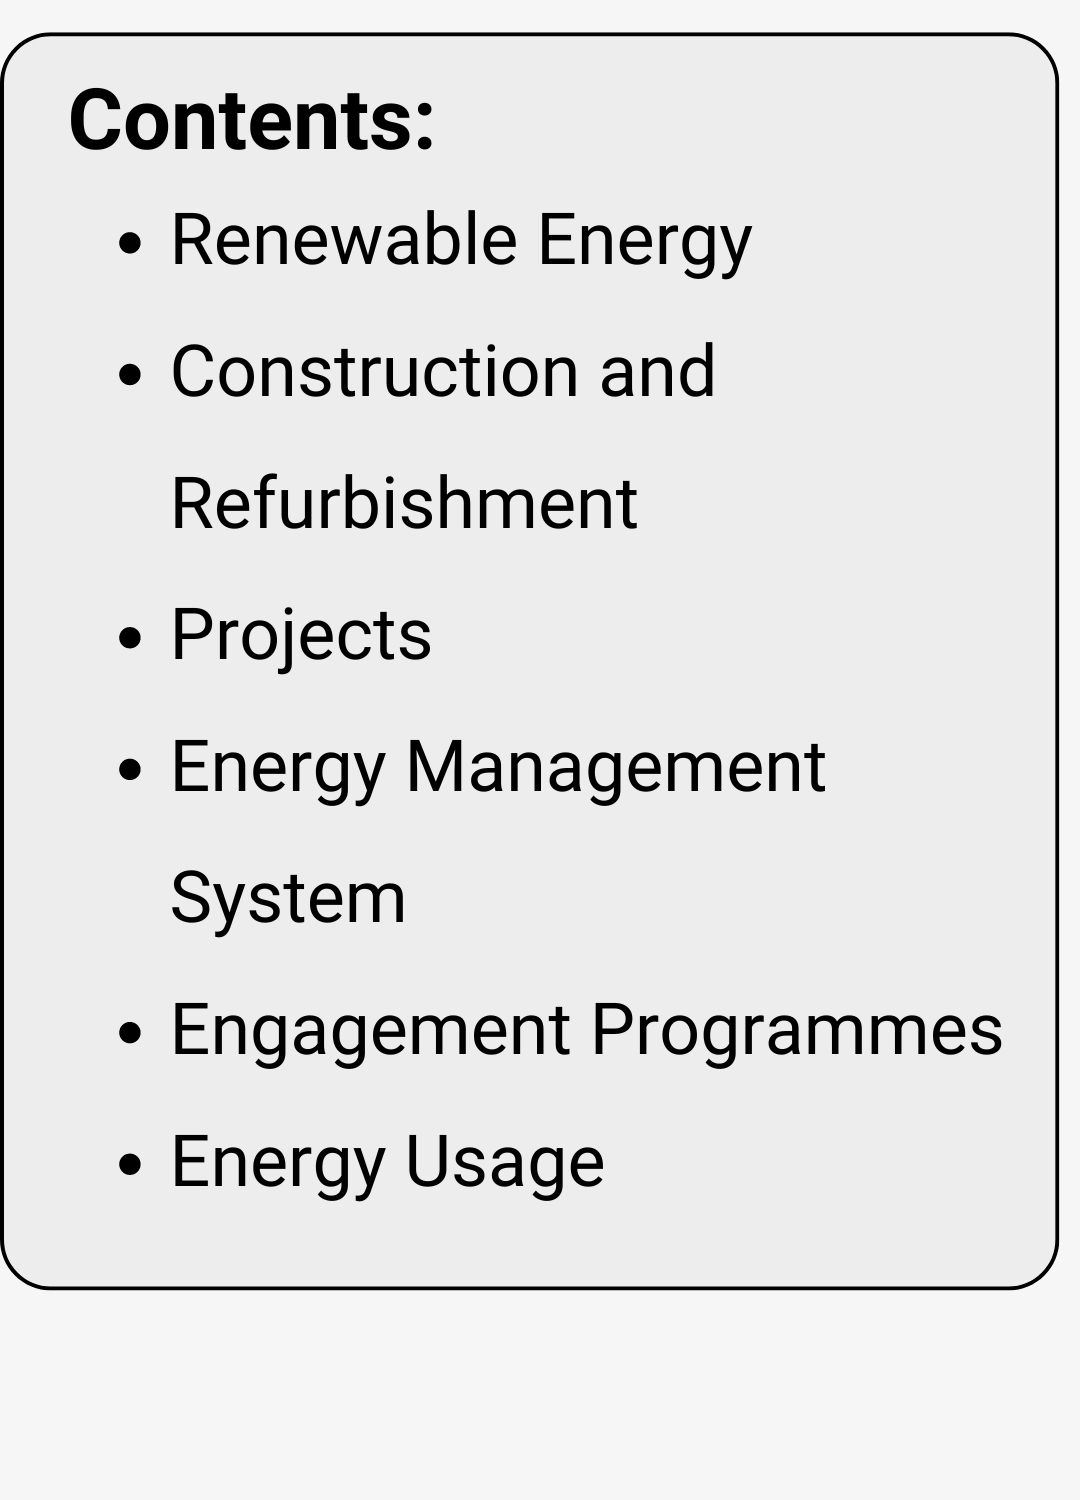 Copy of Contents - Energy